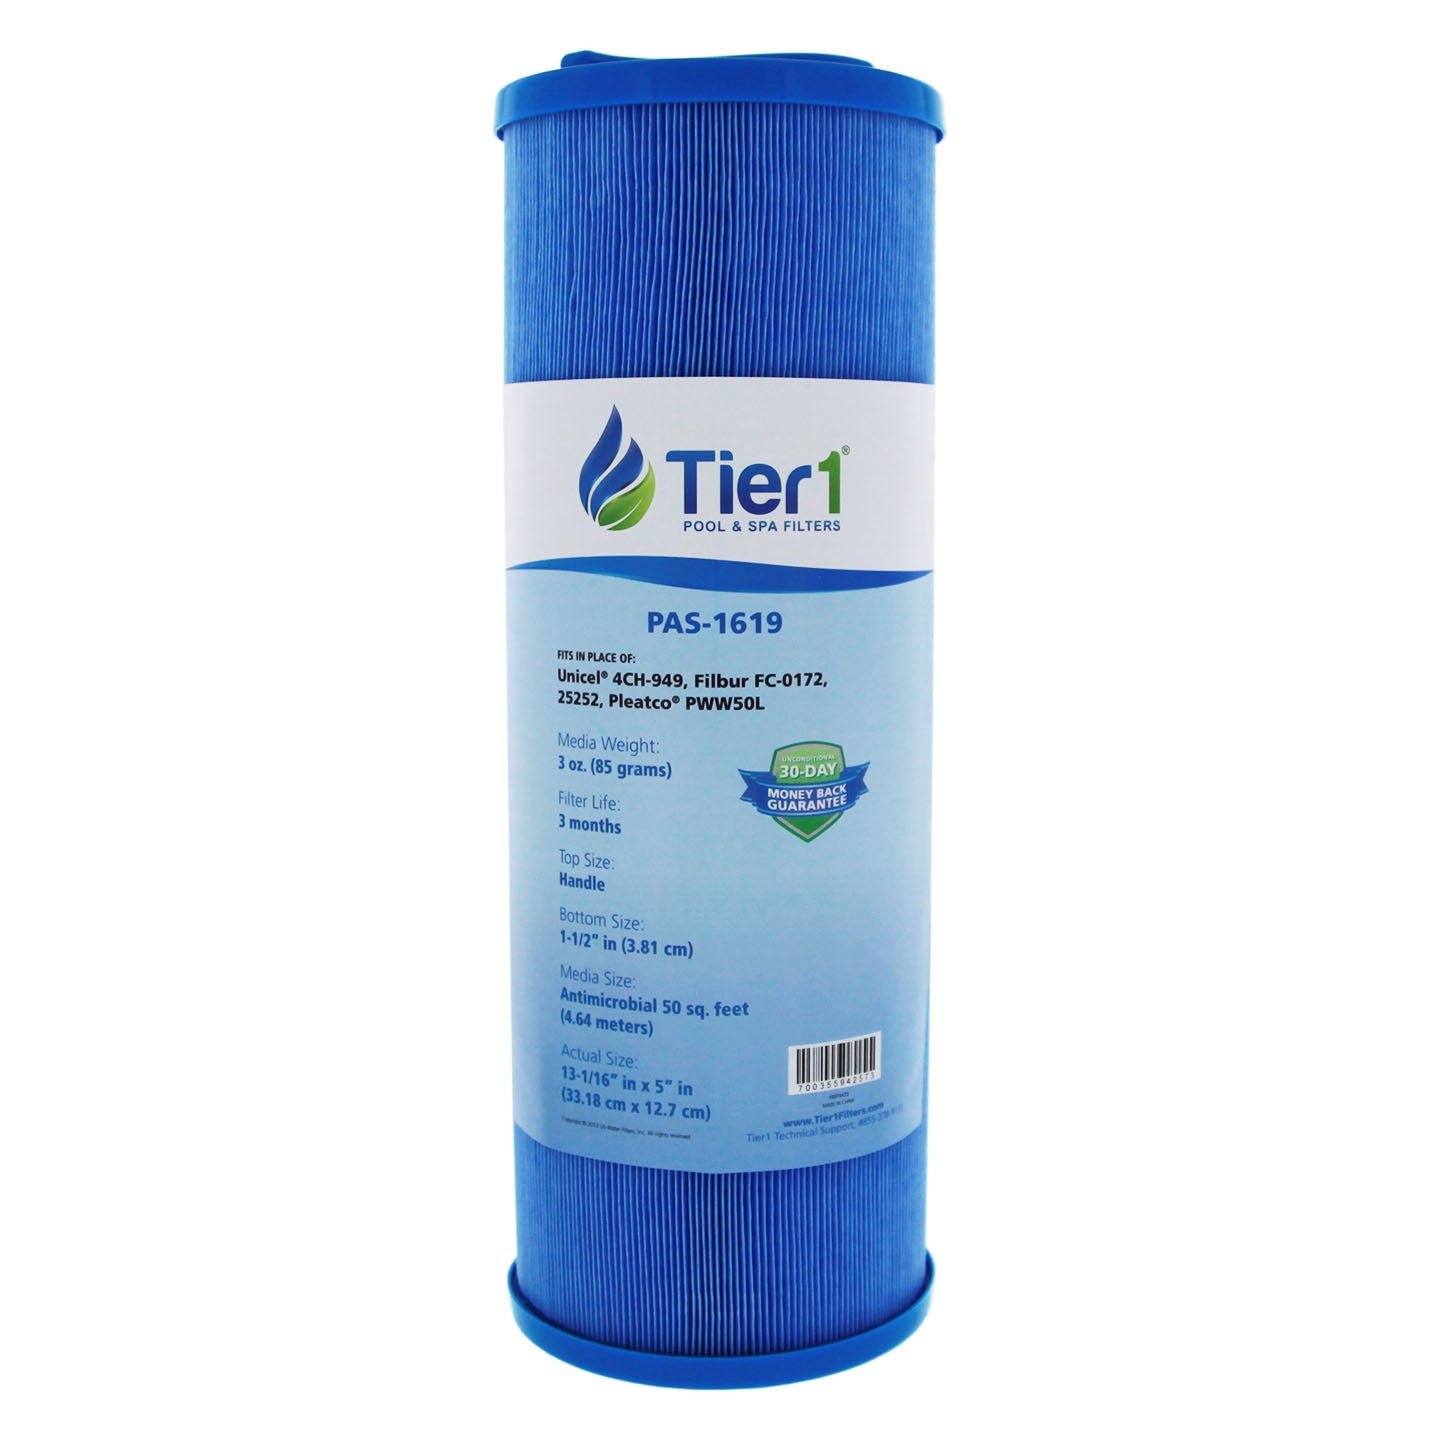 Tier1 brand replacement for 817-4050 (Antimicrobial) (With Label)